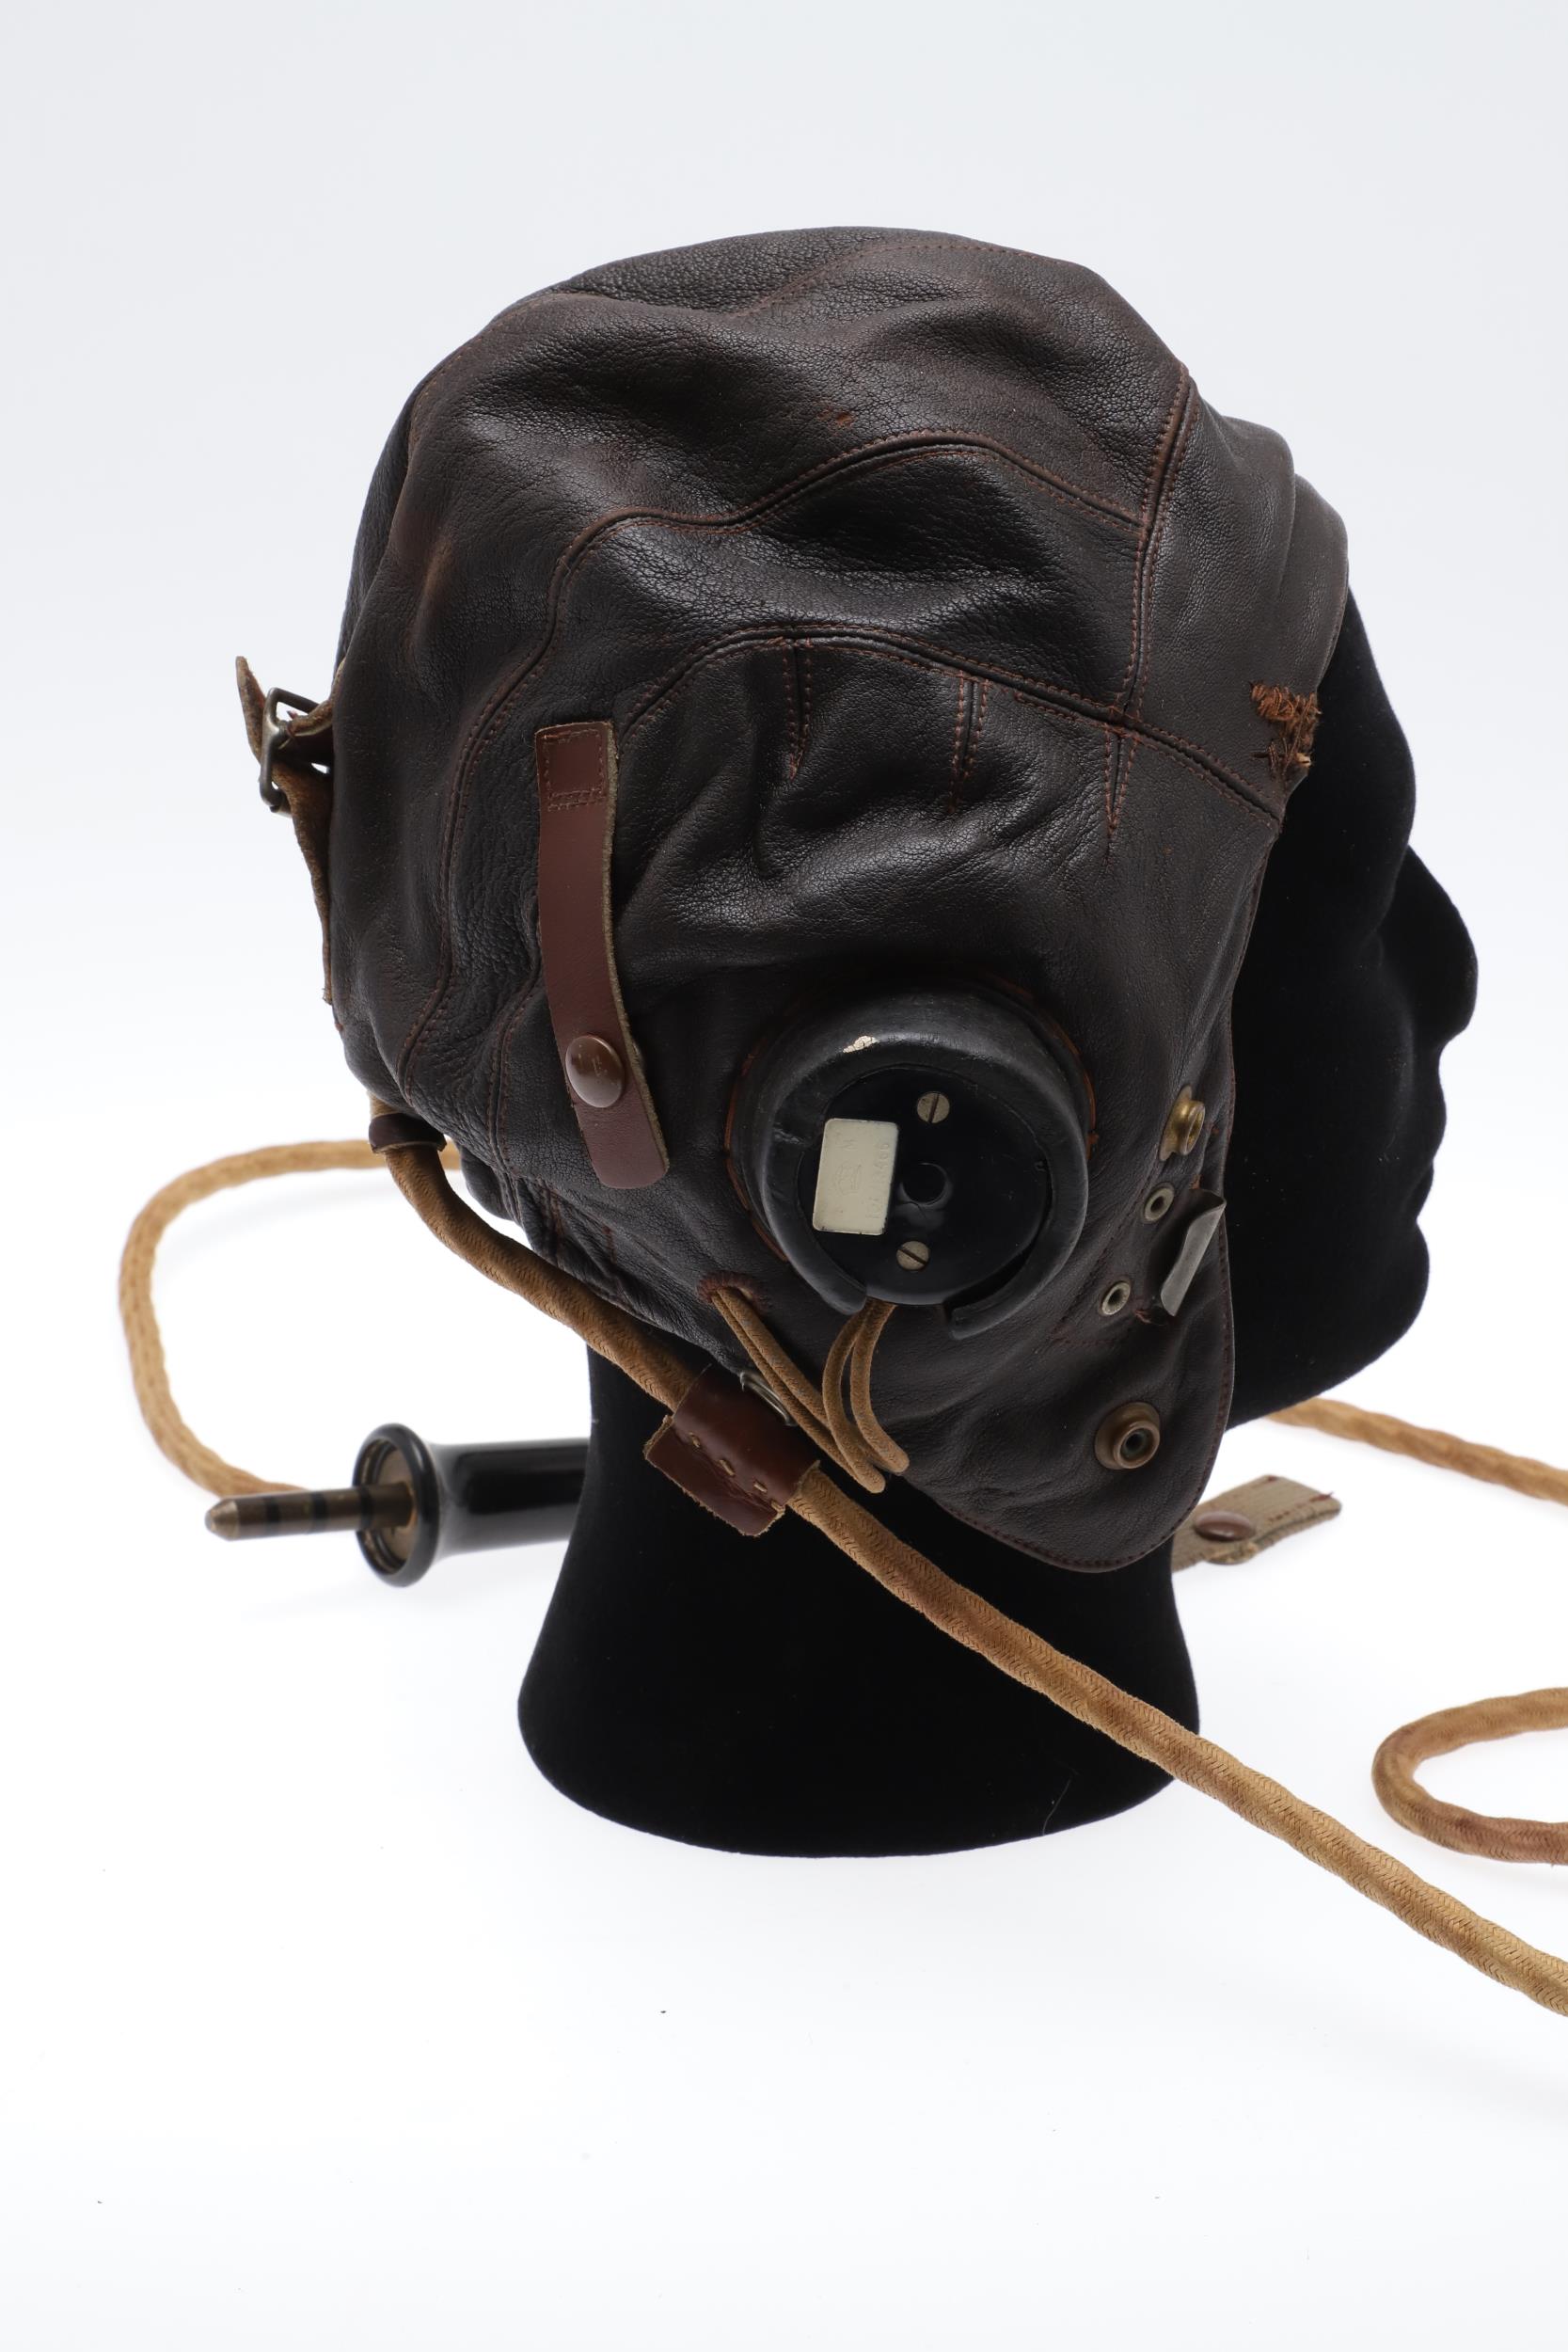 AN AIR MINISTRY TYPE C FLYING HELMET, GOGGLES AND GLOVES. - Image 15 of 21